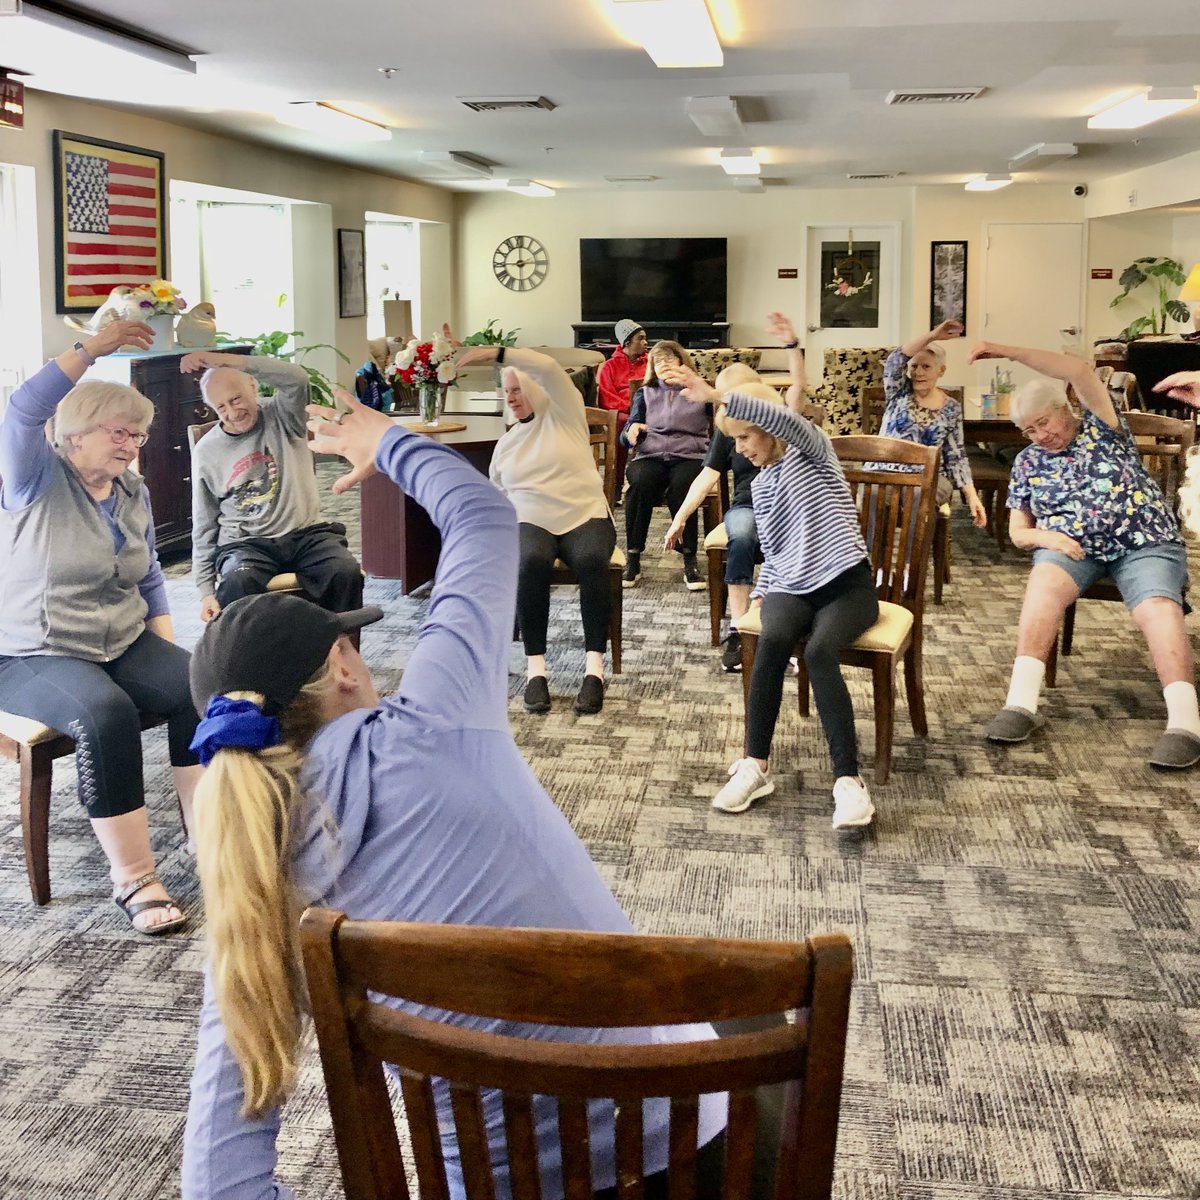 Who’s up for Chair Yoga? The residents at AHEPA 250 V in Niantic, Connecticut, are! Chair yoga may help seniors with balance, strength, flexibility, and reduce the fear of falls.

ahepaseniorliving.org/location/ahepa…

#affordablehousing
#olderadults
#healthyaging
#FindPeaceOfMind